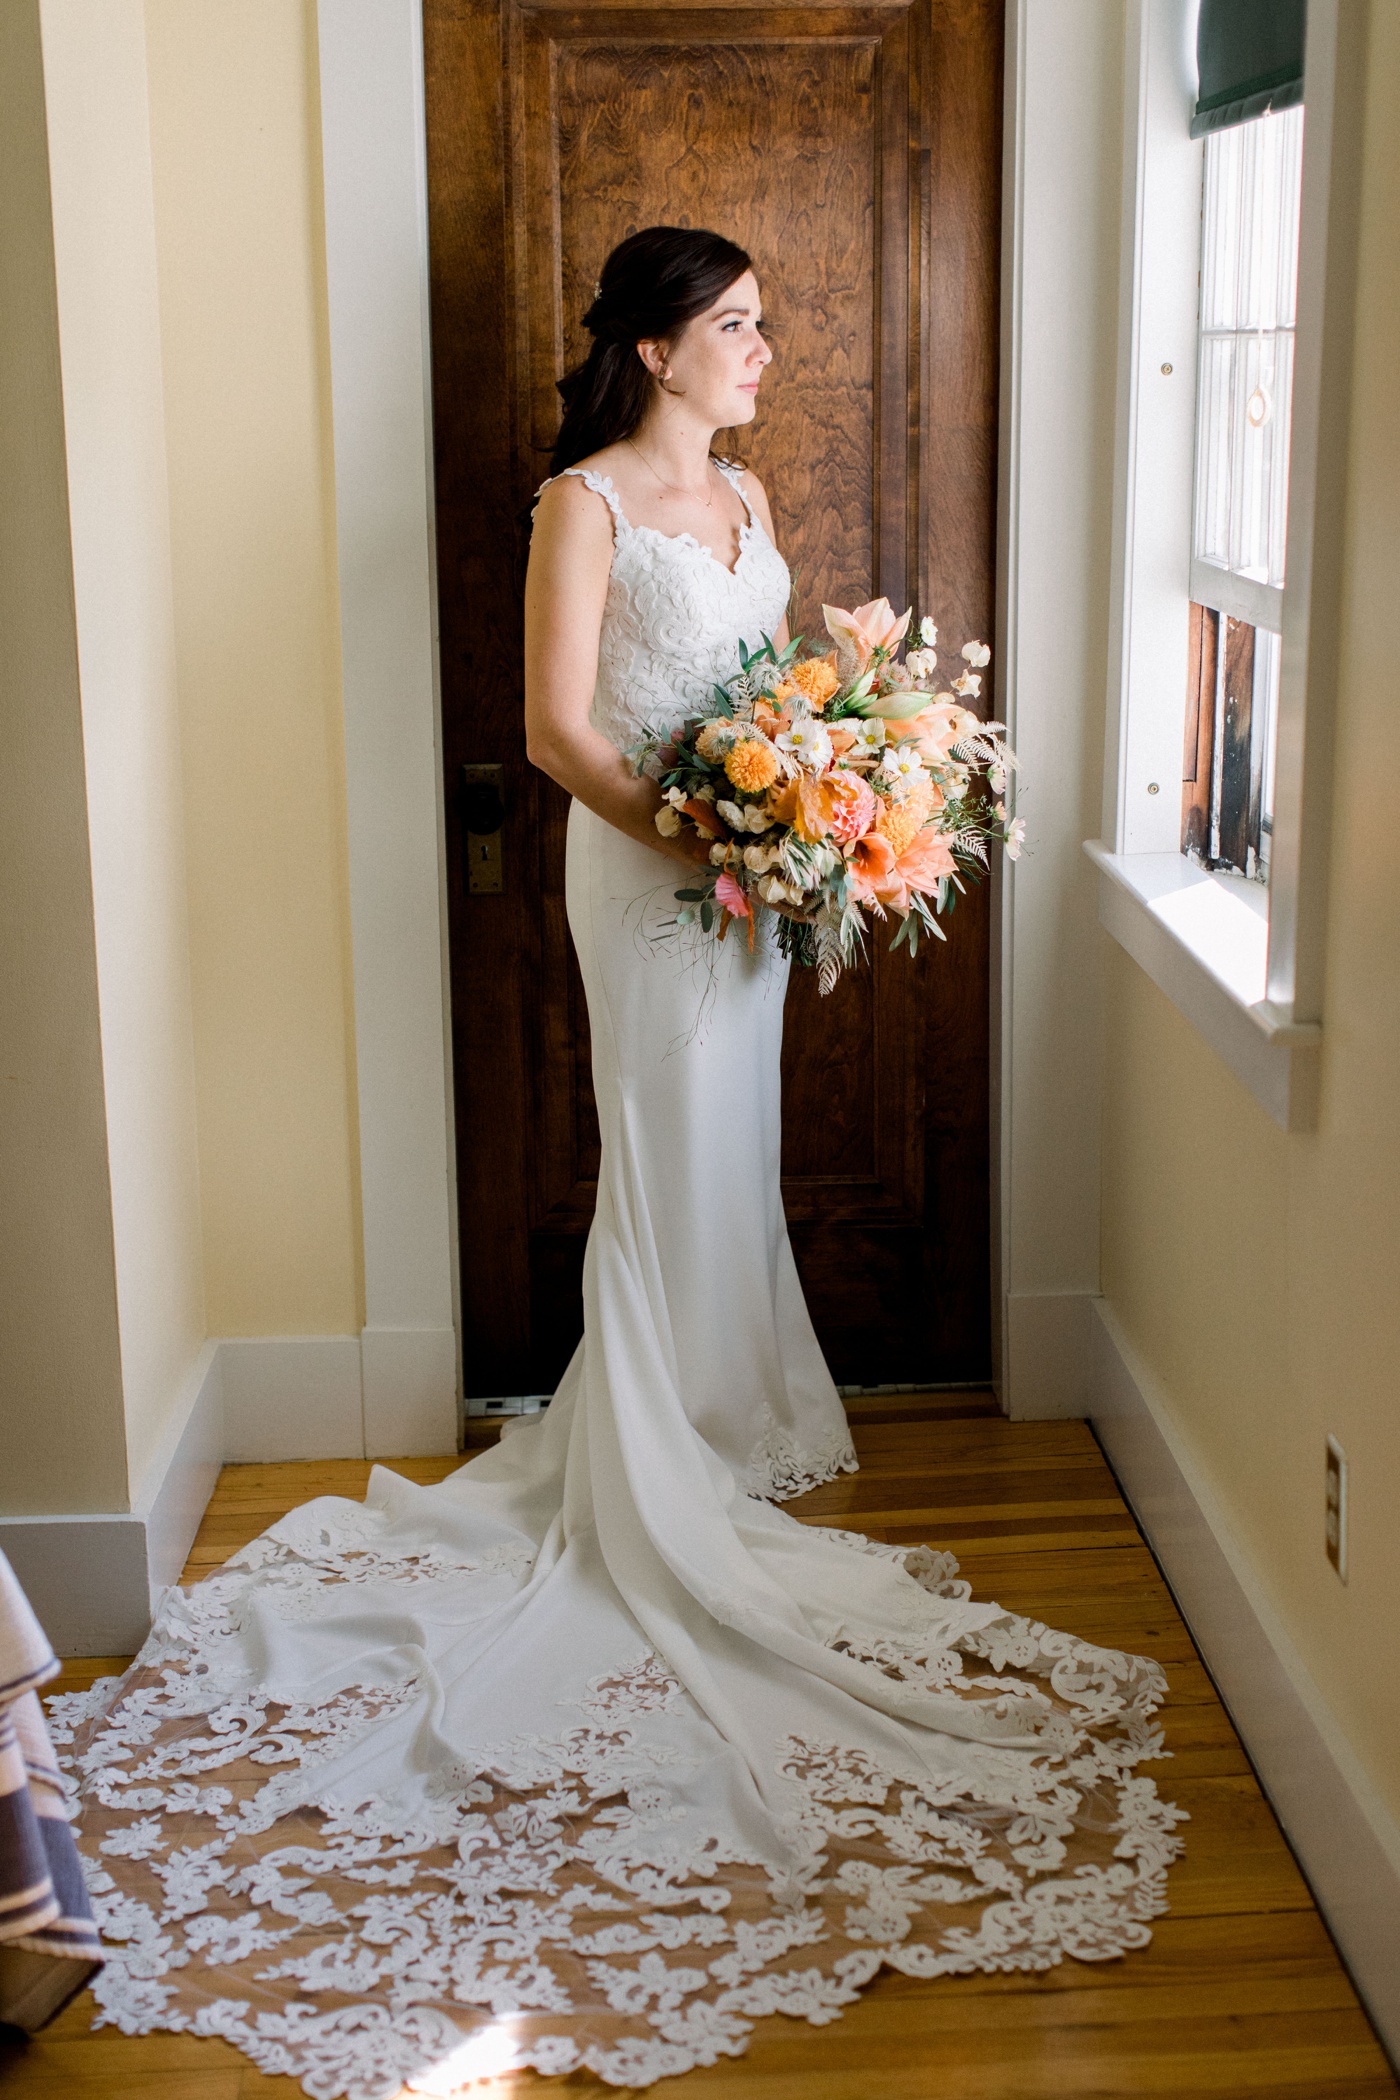 Bride in a wedding gown with lace detail and a mermaid skirt